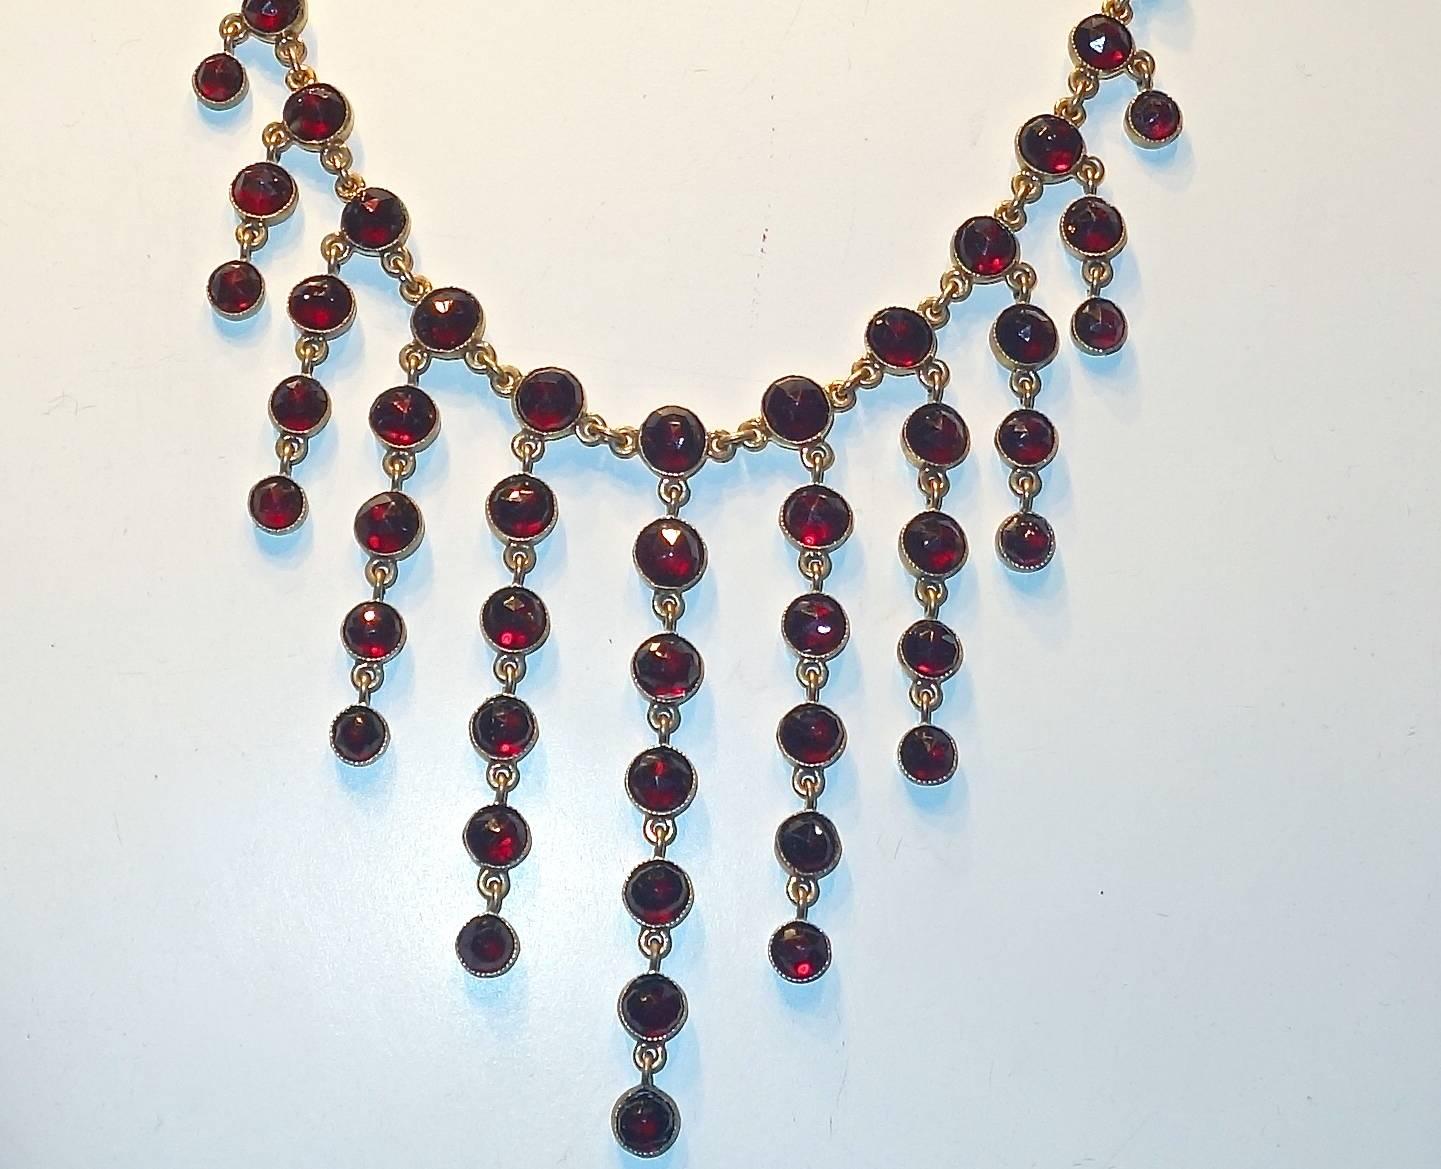 Late 19th century, this piece consisted of milgrained and bezel set rose cut natural garnets in a yellow base metal necklace.  There are 87 deep red natural rose cut garnets - weighing approximately 40 cts.  This antique necklace is 20 inches long